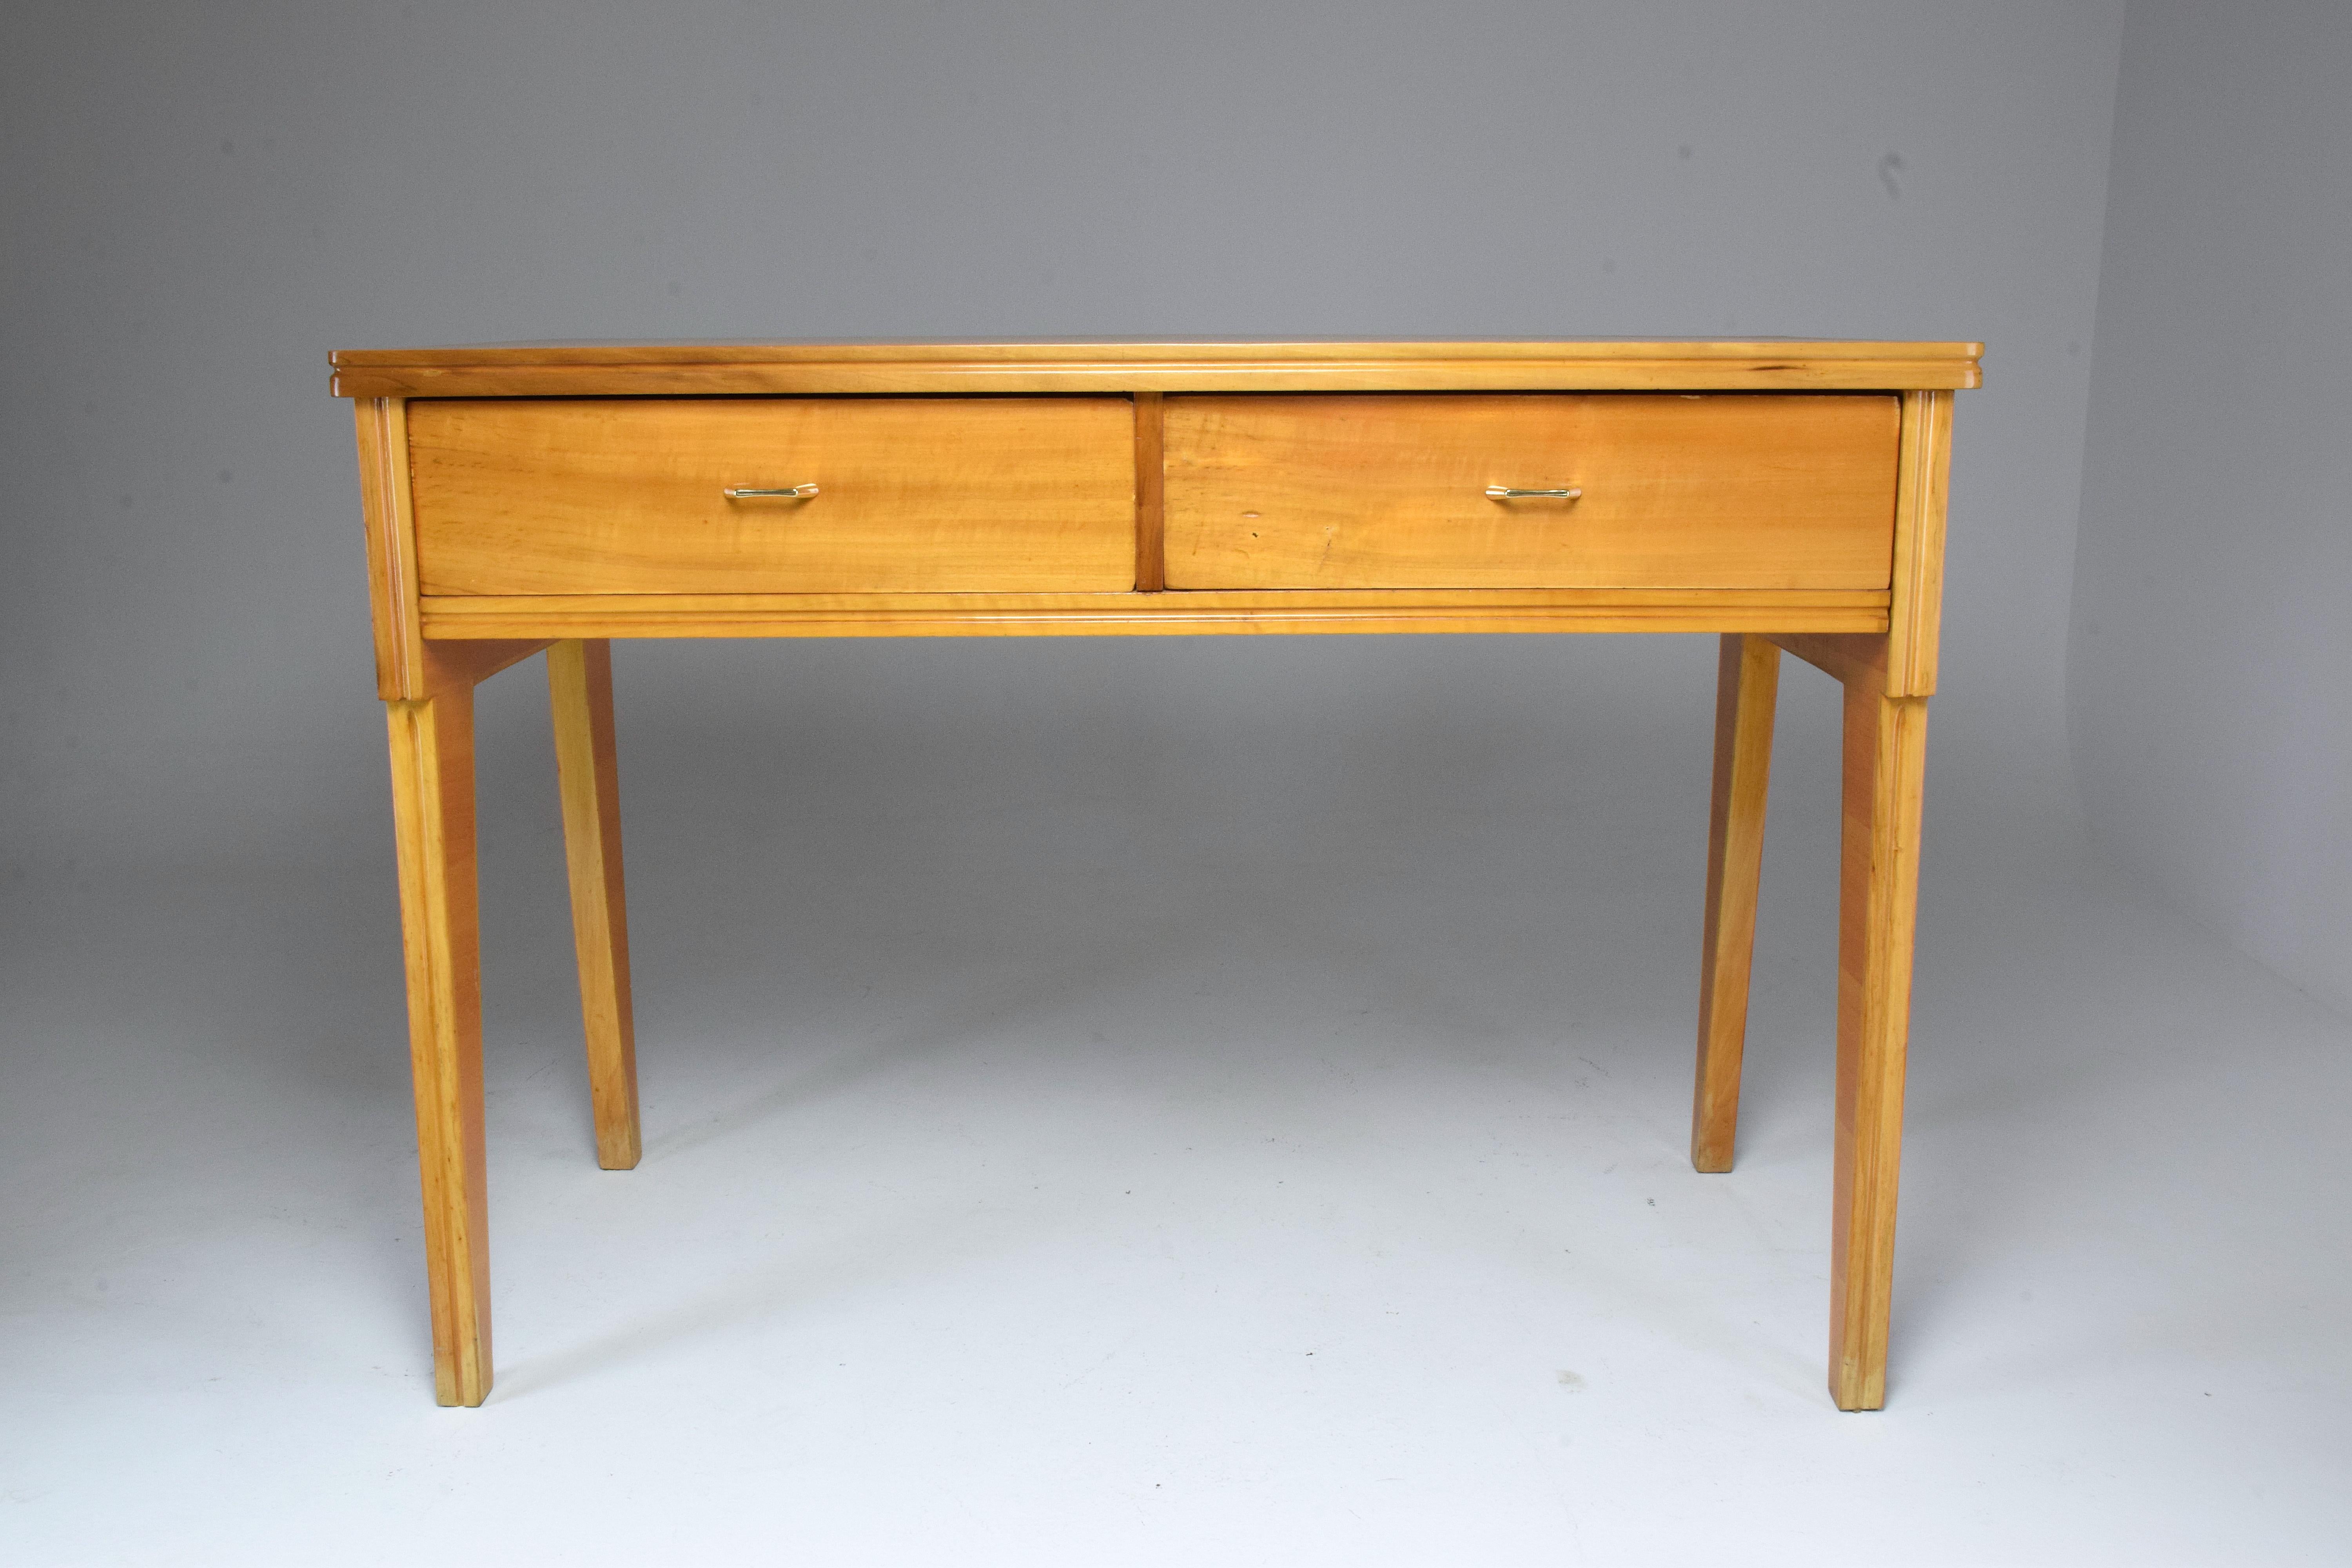 20th century vintage Italian desk or vanity in the style of Ico Parisi composed of a restored cherrywood structure with compass legs and comprised of two drawers sizes 14 x 50 cm with stylish brass handles.

Italy, circa 1950s-1960s.
____
All our